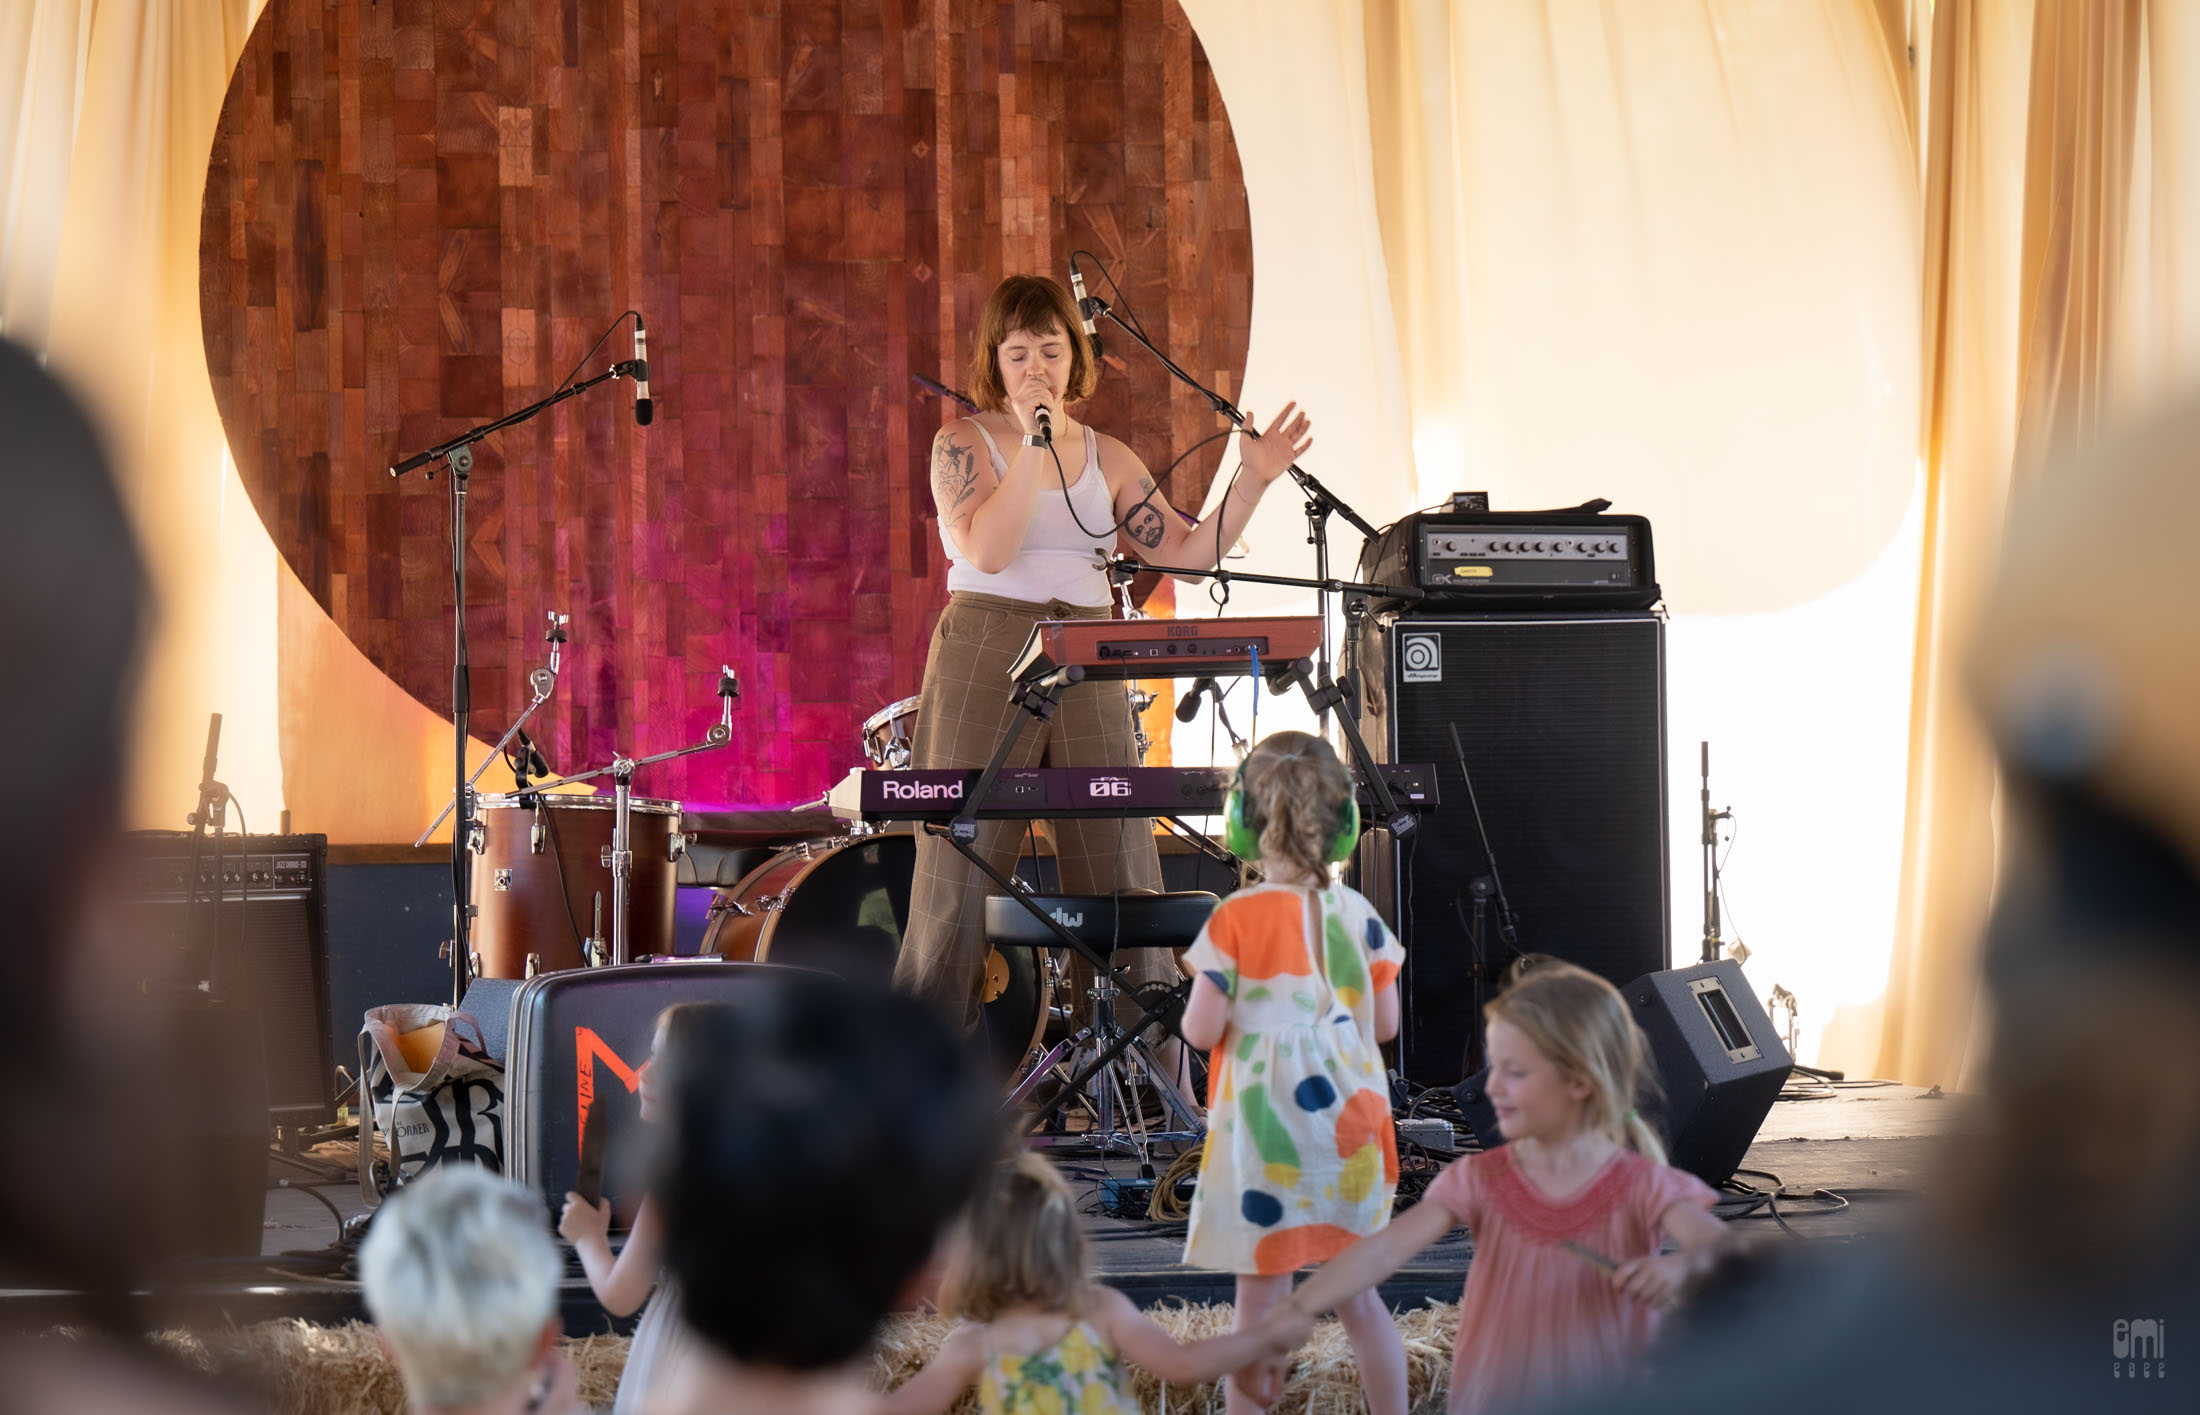 20220611 Madeline Kenney at Huichica Music Festival 2022 Sonoma CA. photo by emi